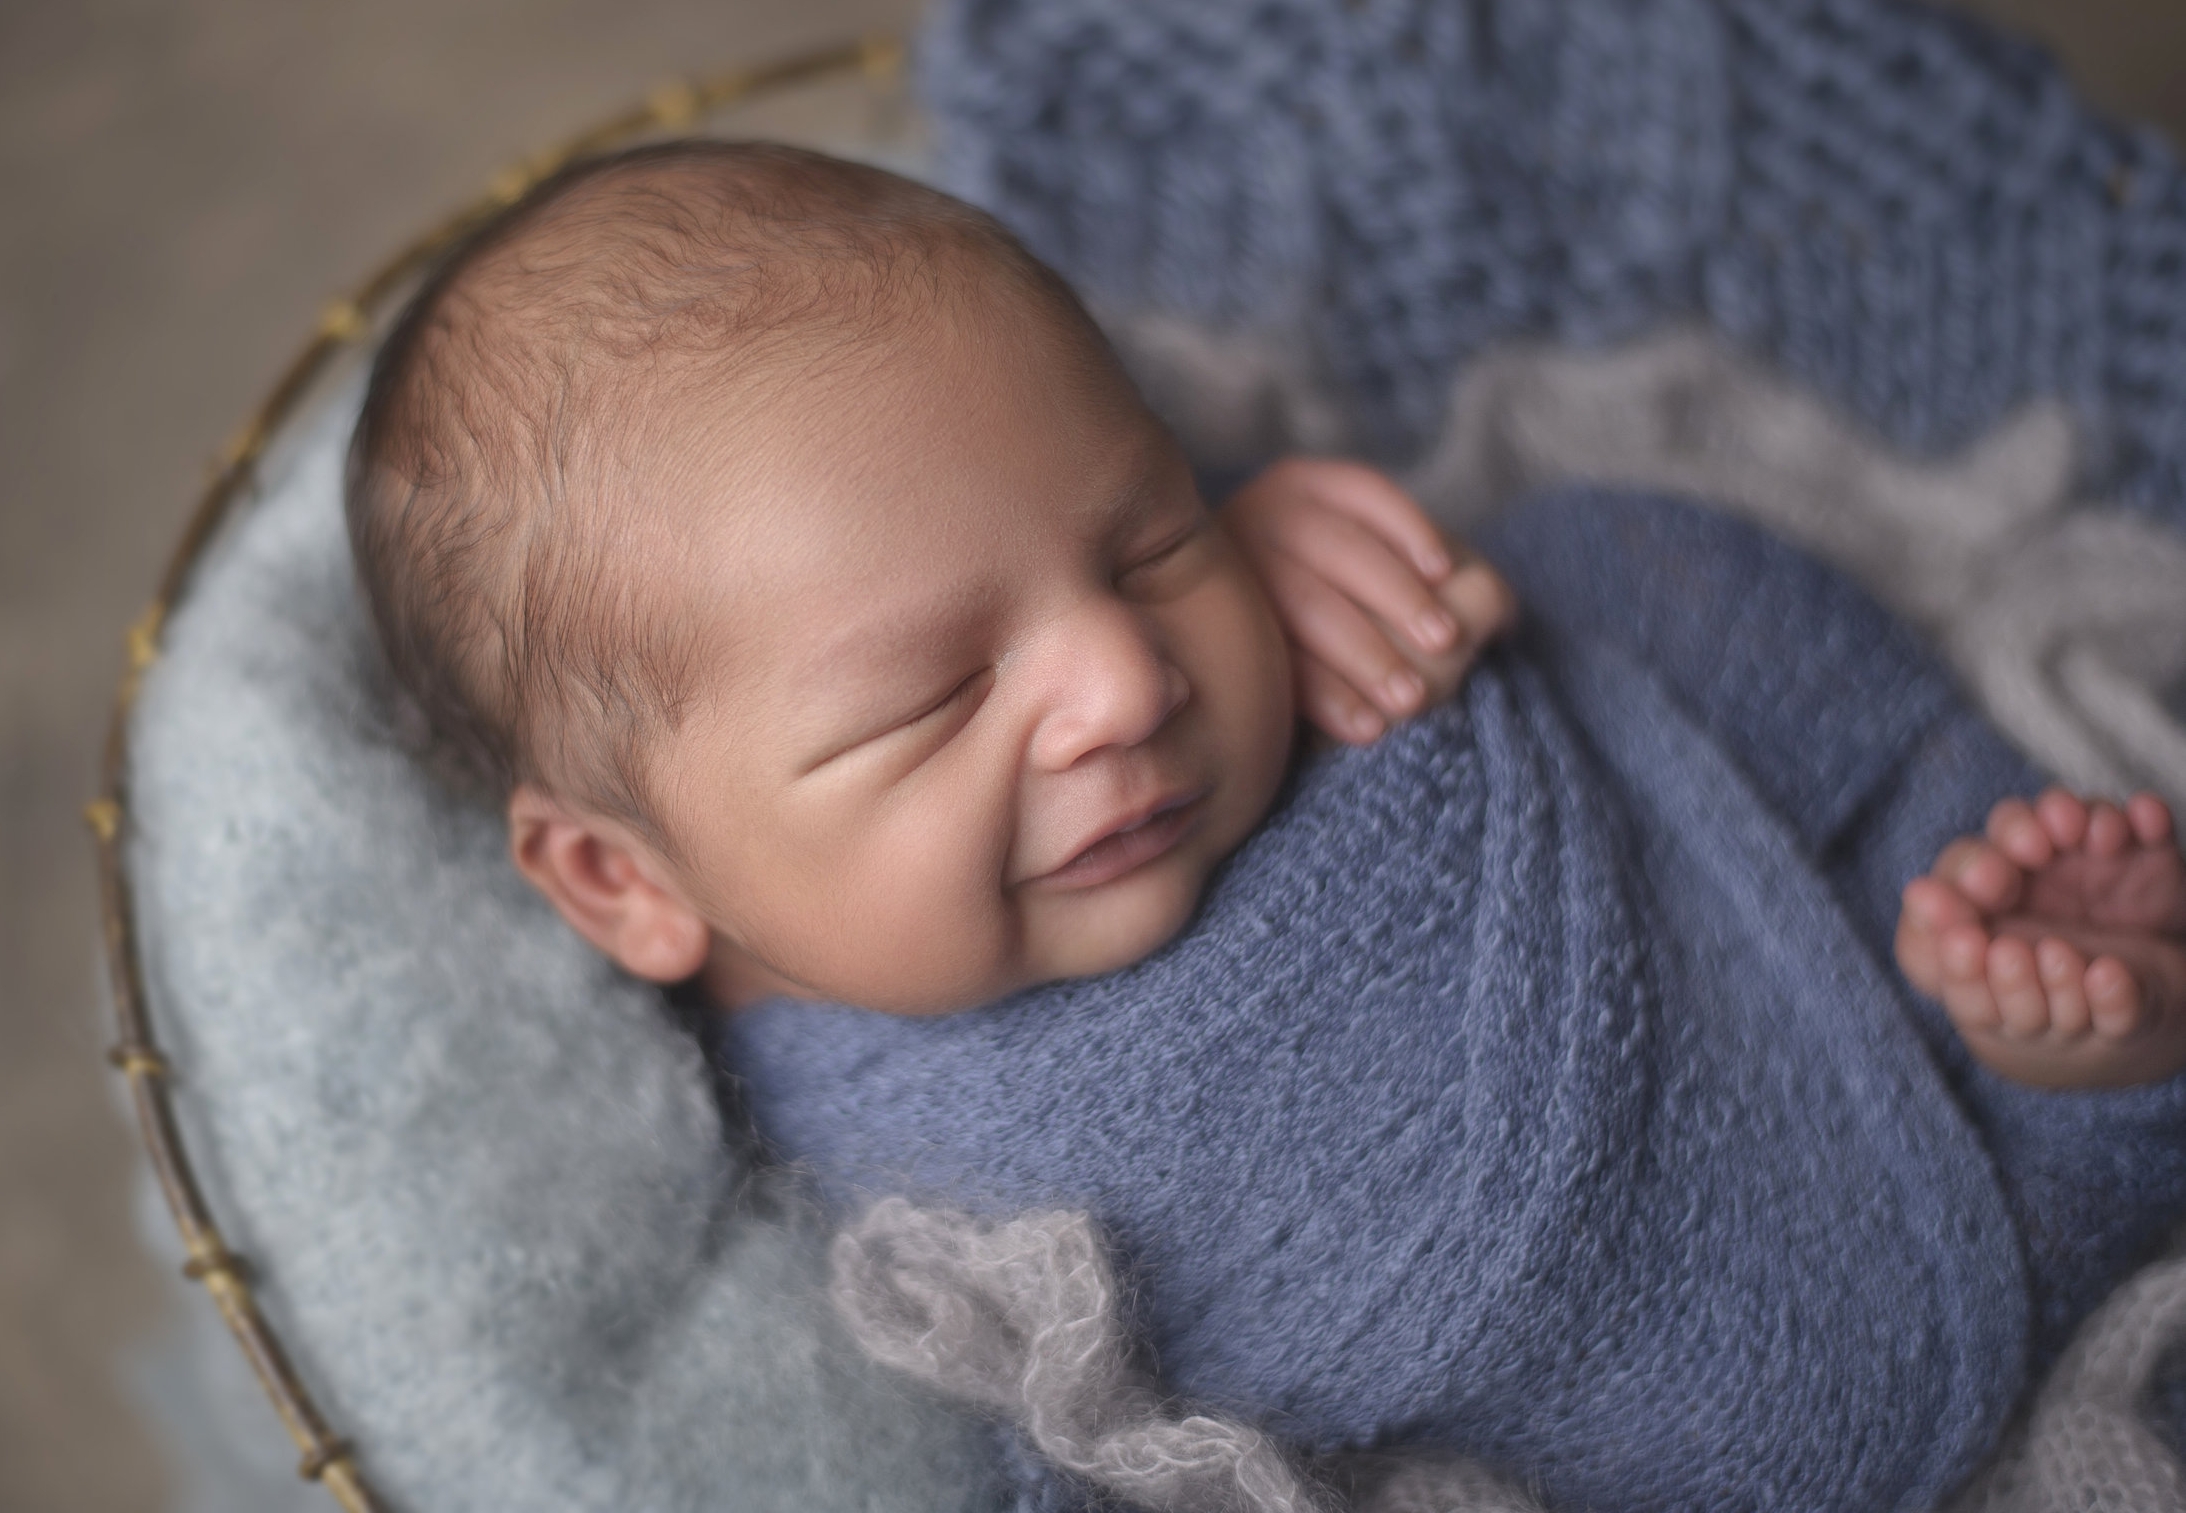 Newborn baby wrapped in a personalized blanket